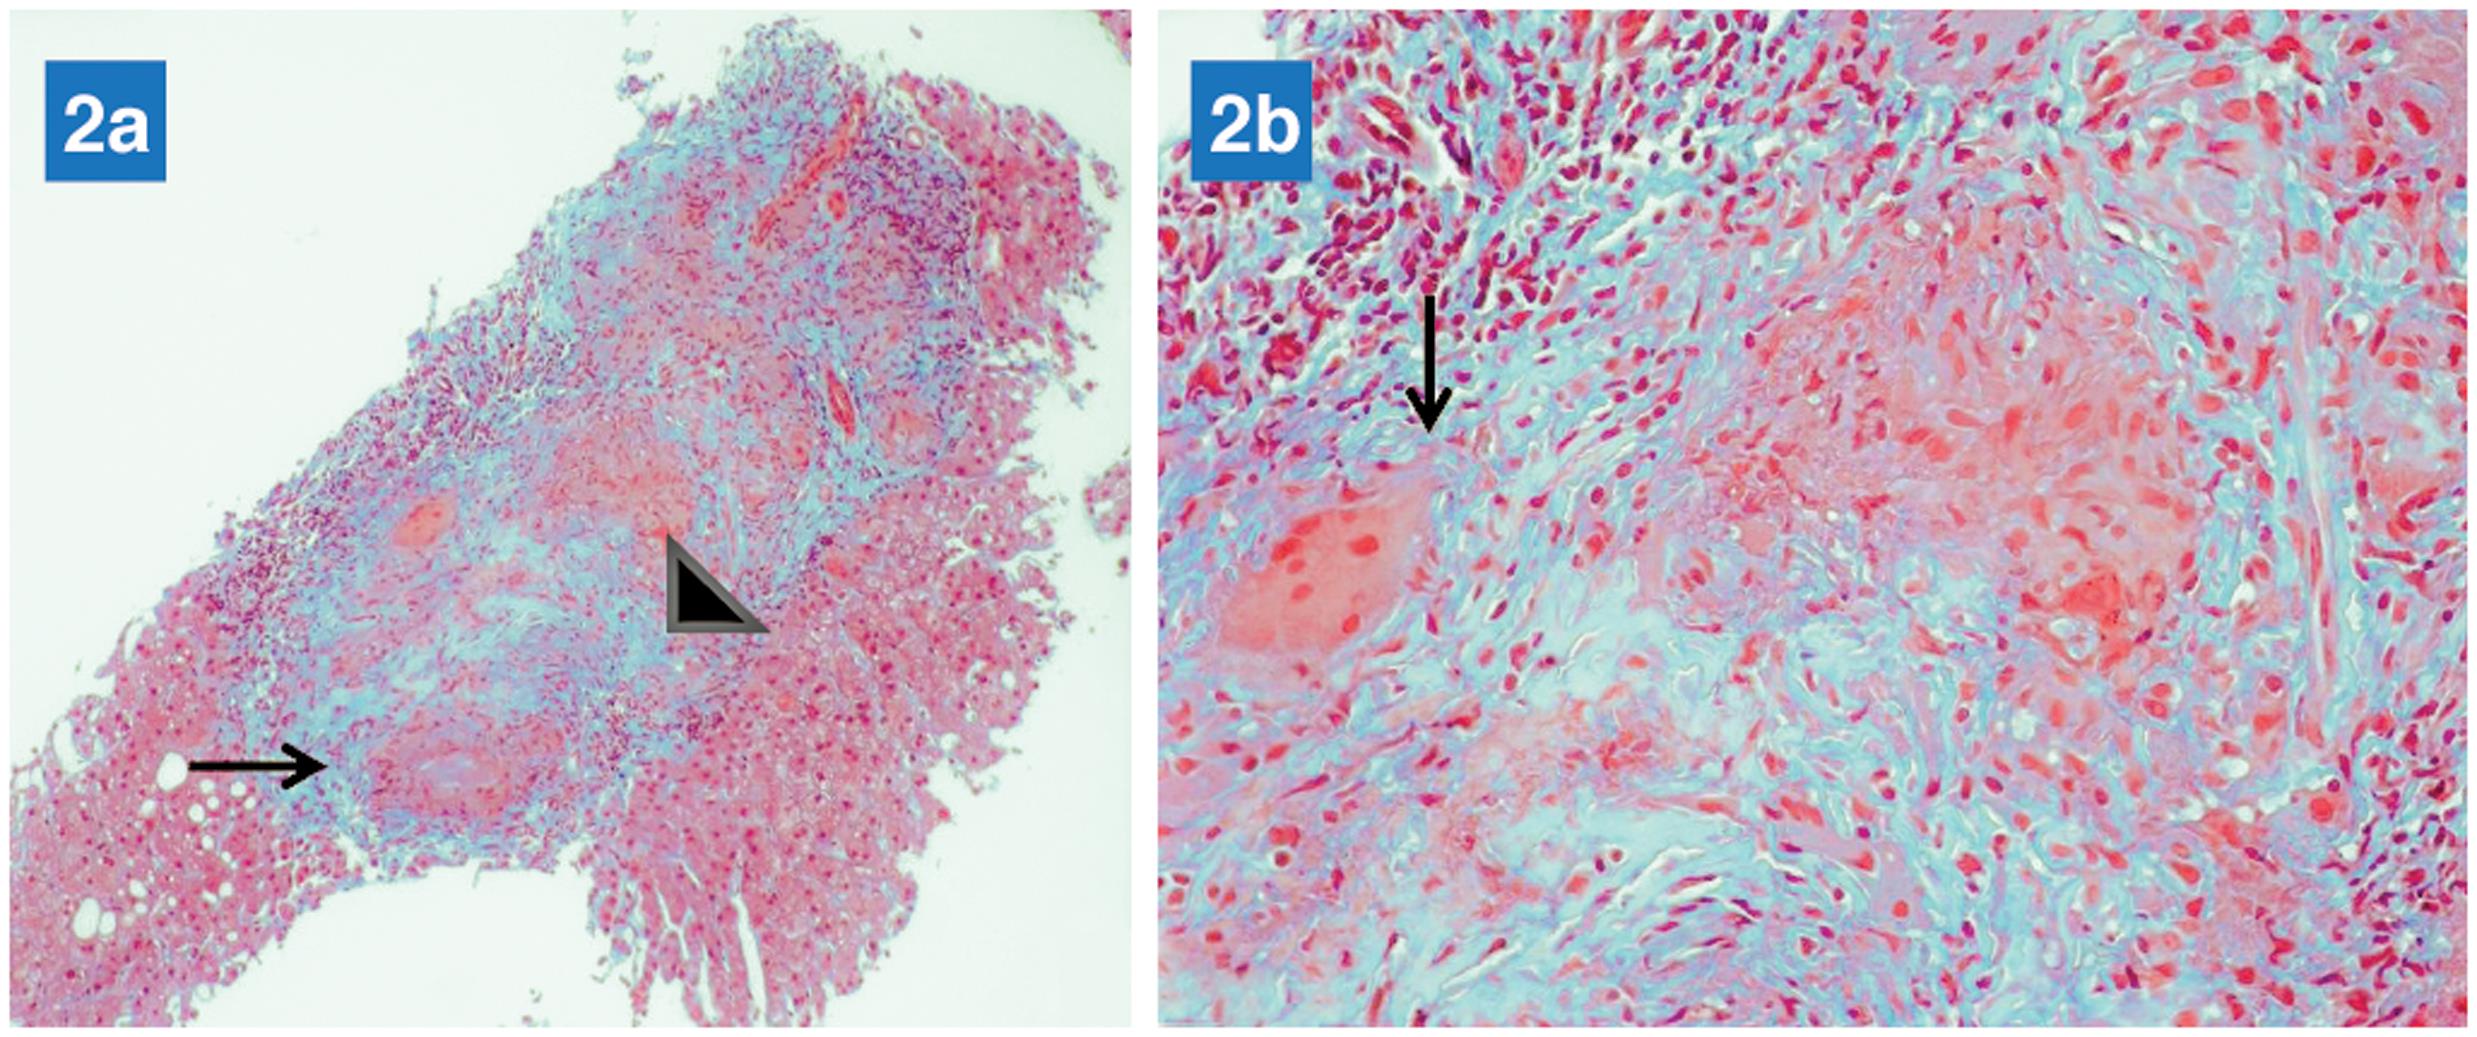 A liver biopsy specimen showing: a, a conglomerate of granulomatous reaction (arrow) with significant fibrosis (arrow head); b, significant as well conglomerate of epithelioid granulomas with giant cells (arrow), but without necrosis